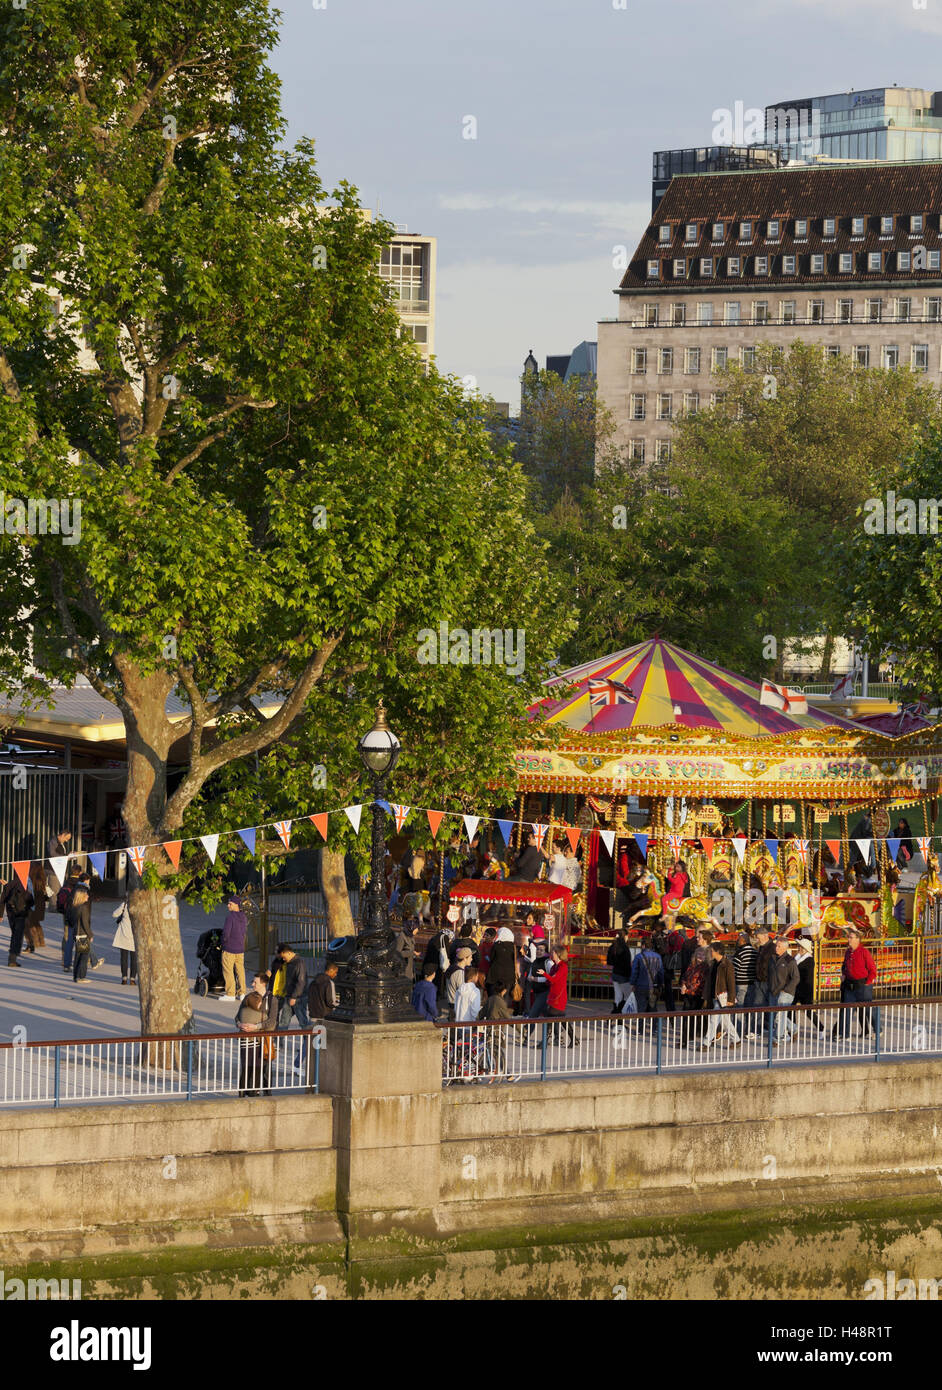 Carousel on the Thames shore, London, England, Great Britain, Stock Photo